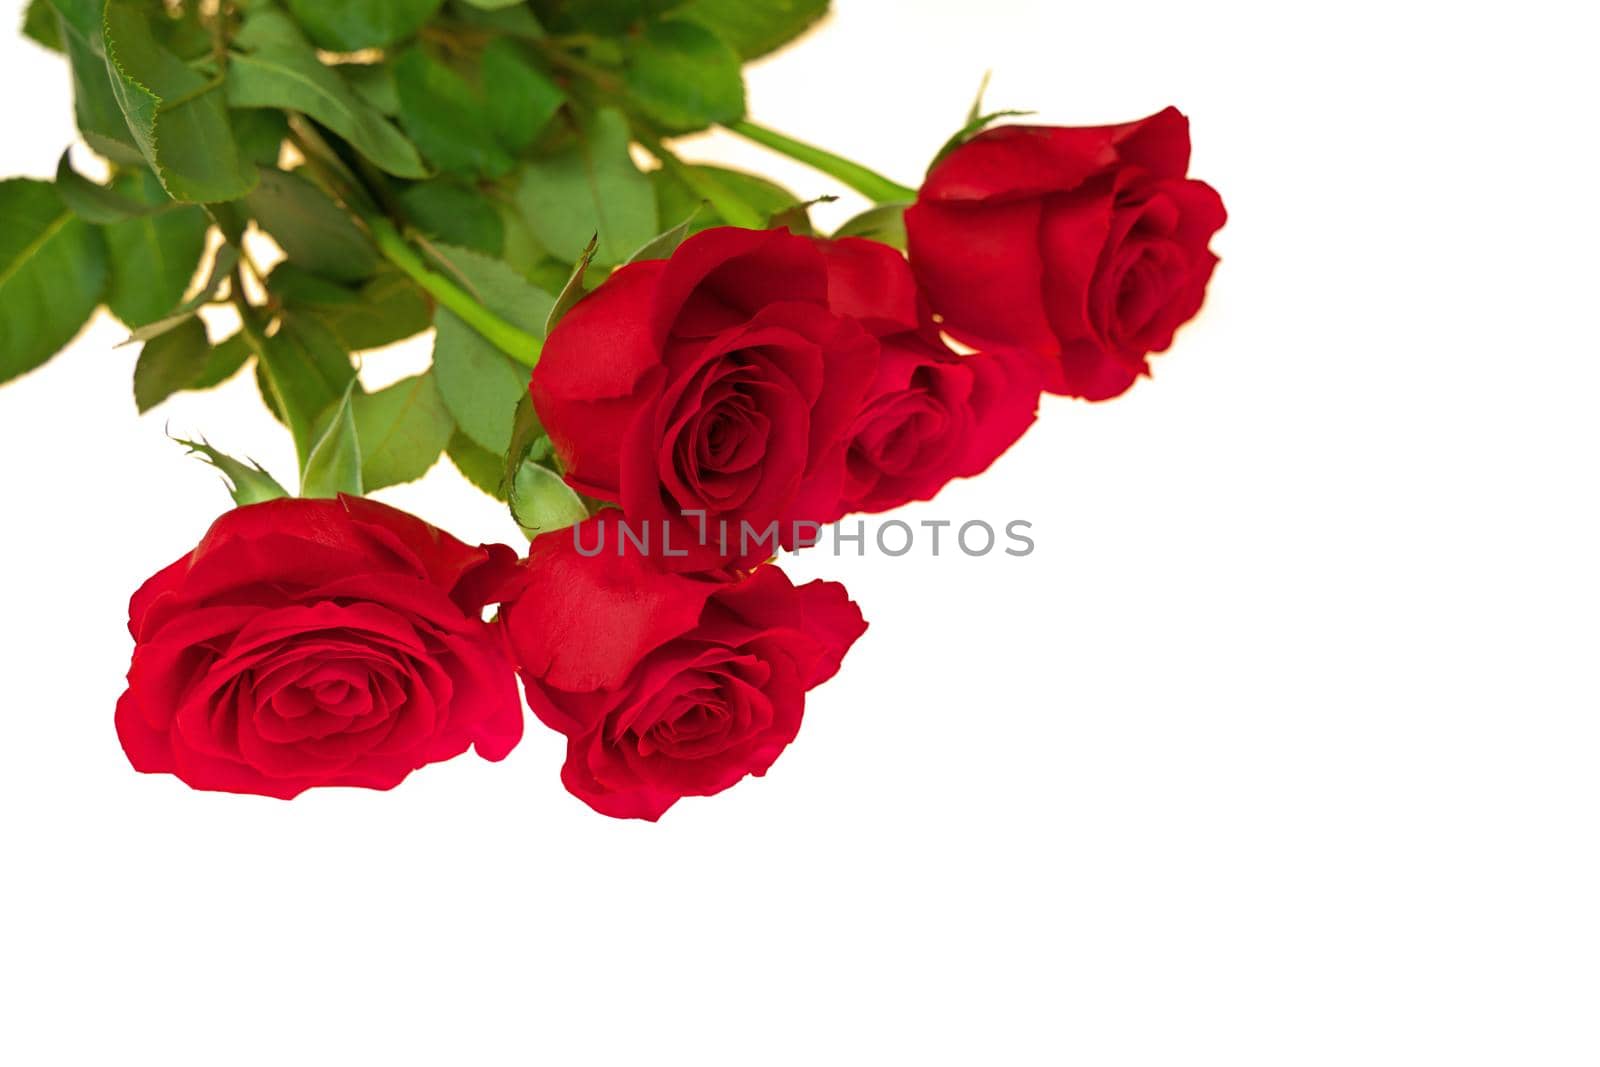 Low Angle View of Red Rose Bouquet Isolated on a Red Background. Copy space right. by markvandam